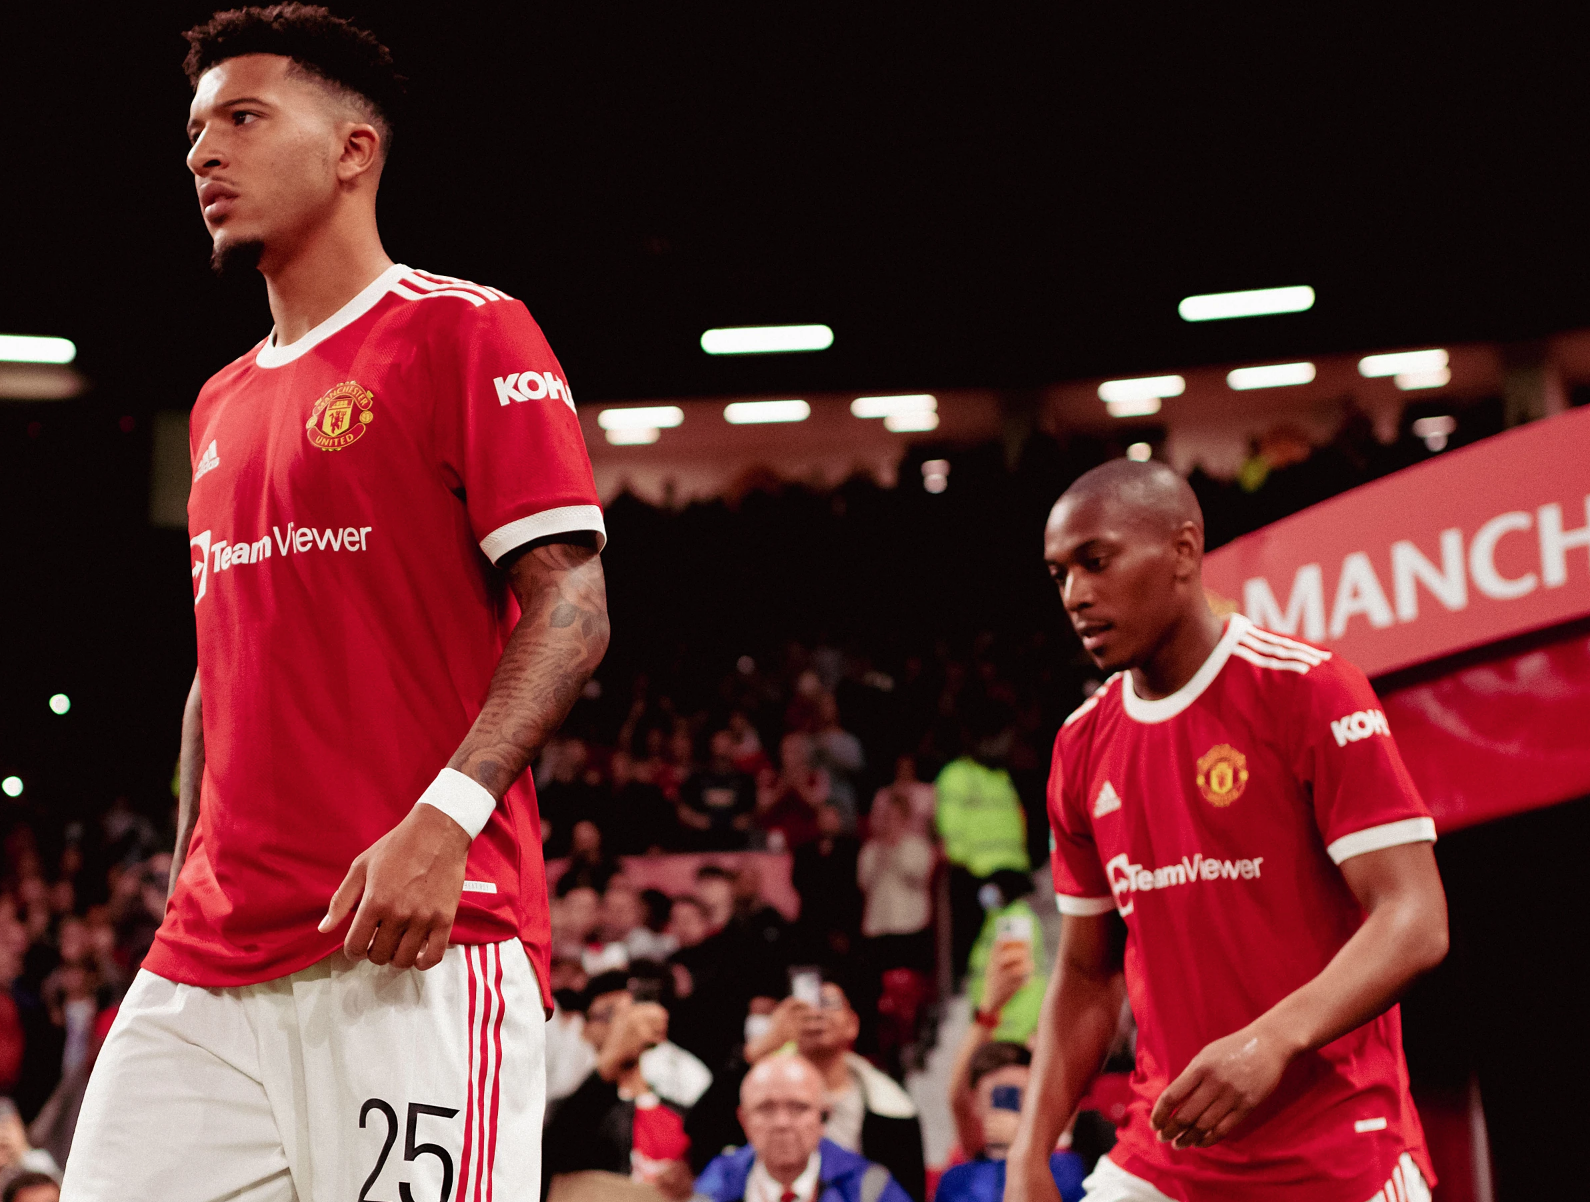 ‘It winds me up!’ – Paul Ince blasts Anthony Martial, Jadon Sancho and Jesse Lingard after Manchester United’s defeat to West Ham